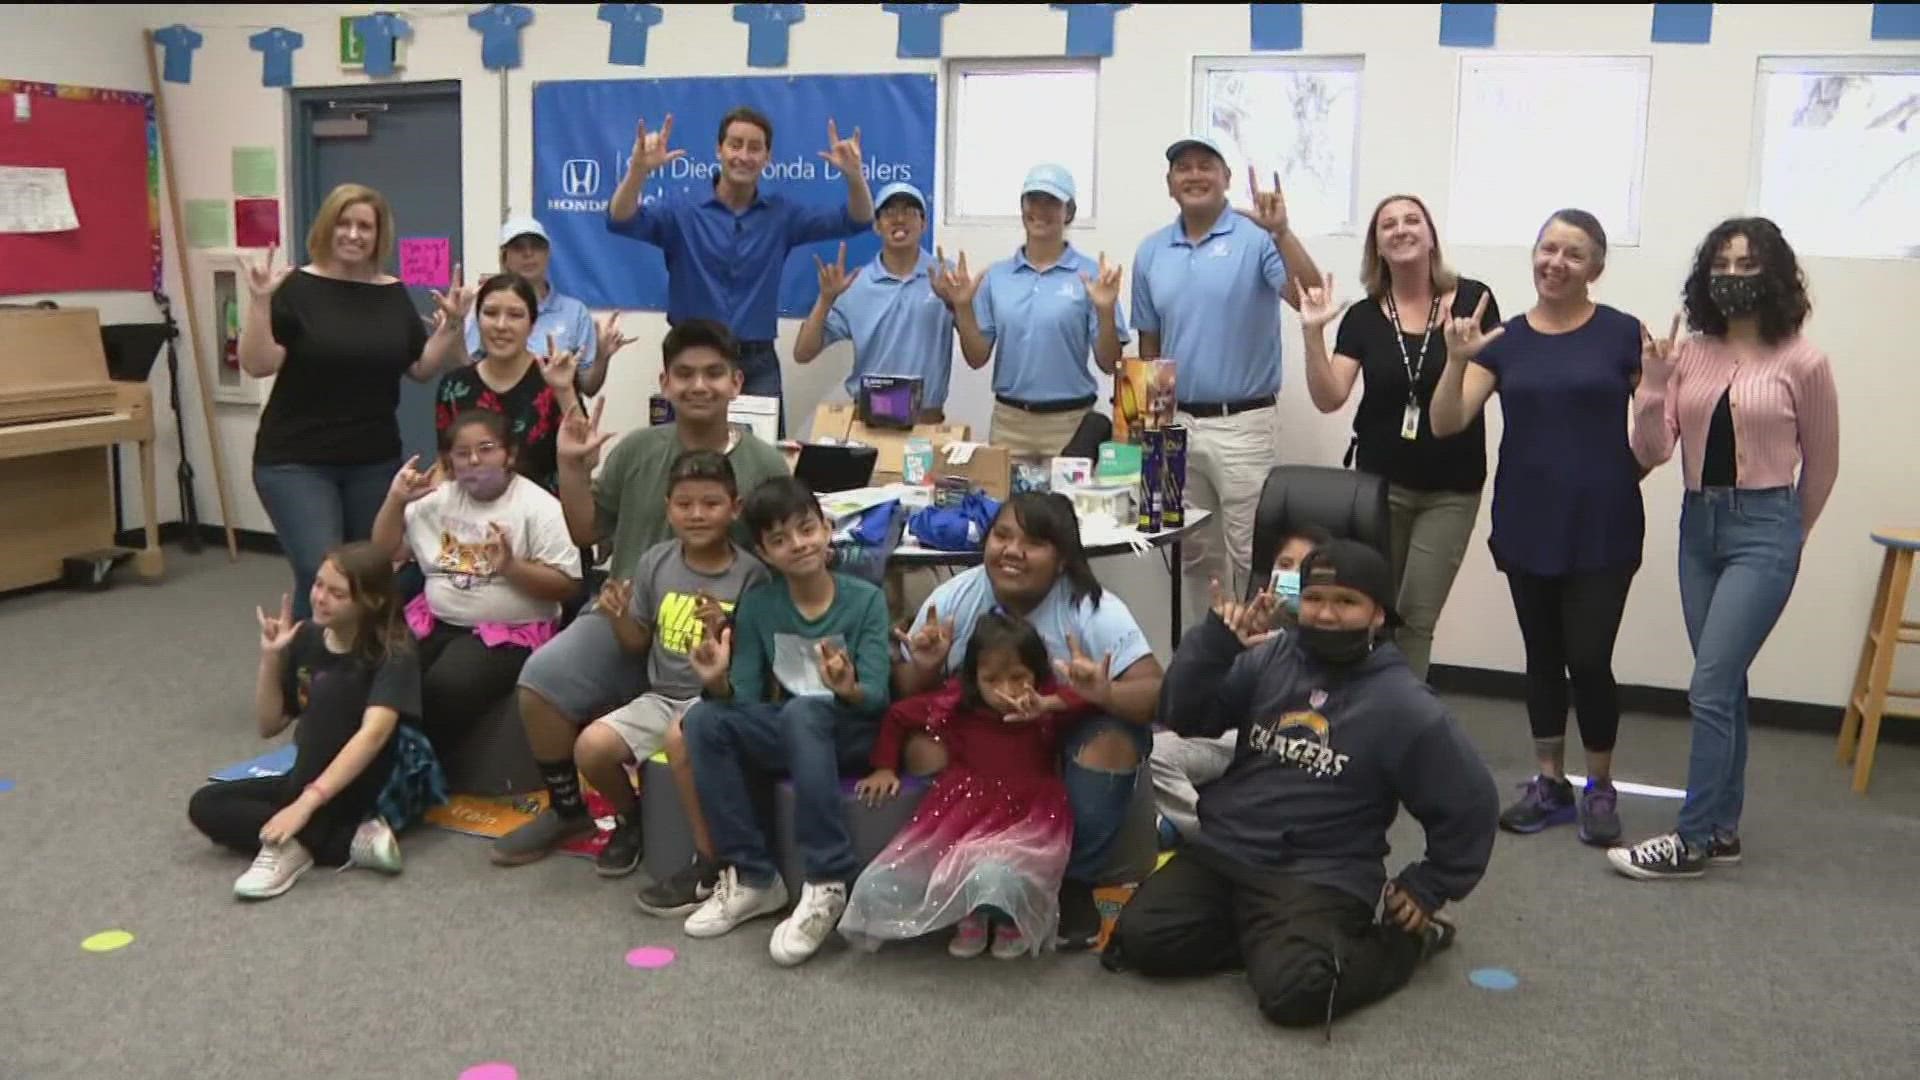 The Helpful Honda People revealed their "Random Act of Helpfulness" at L.R. Green Elementary.